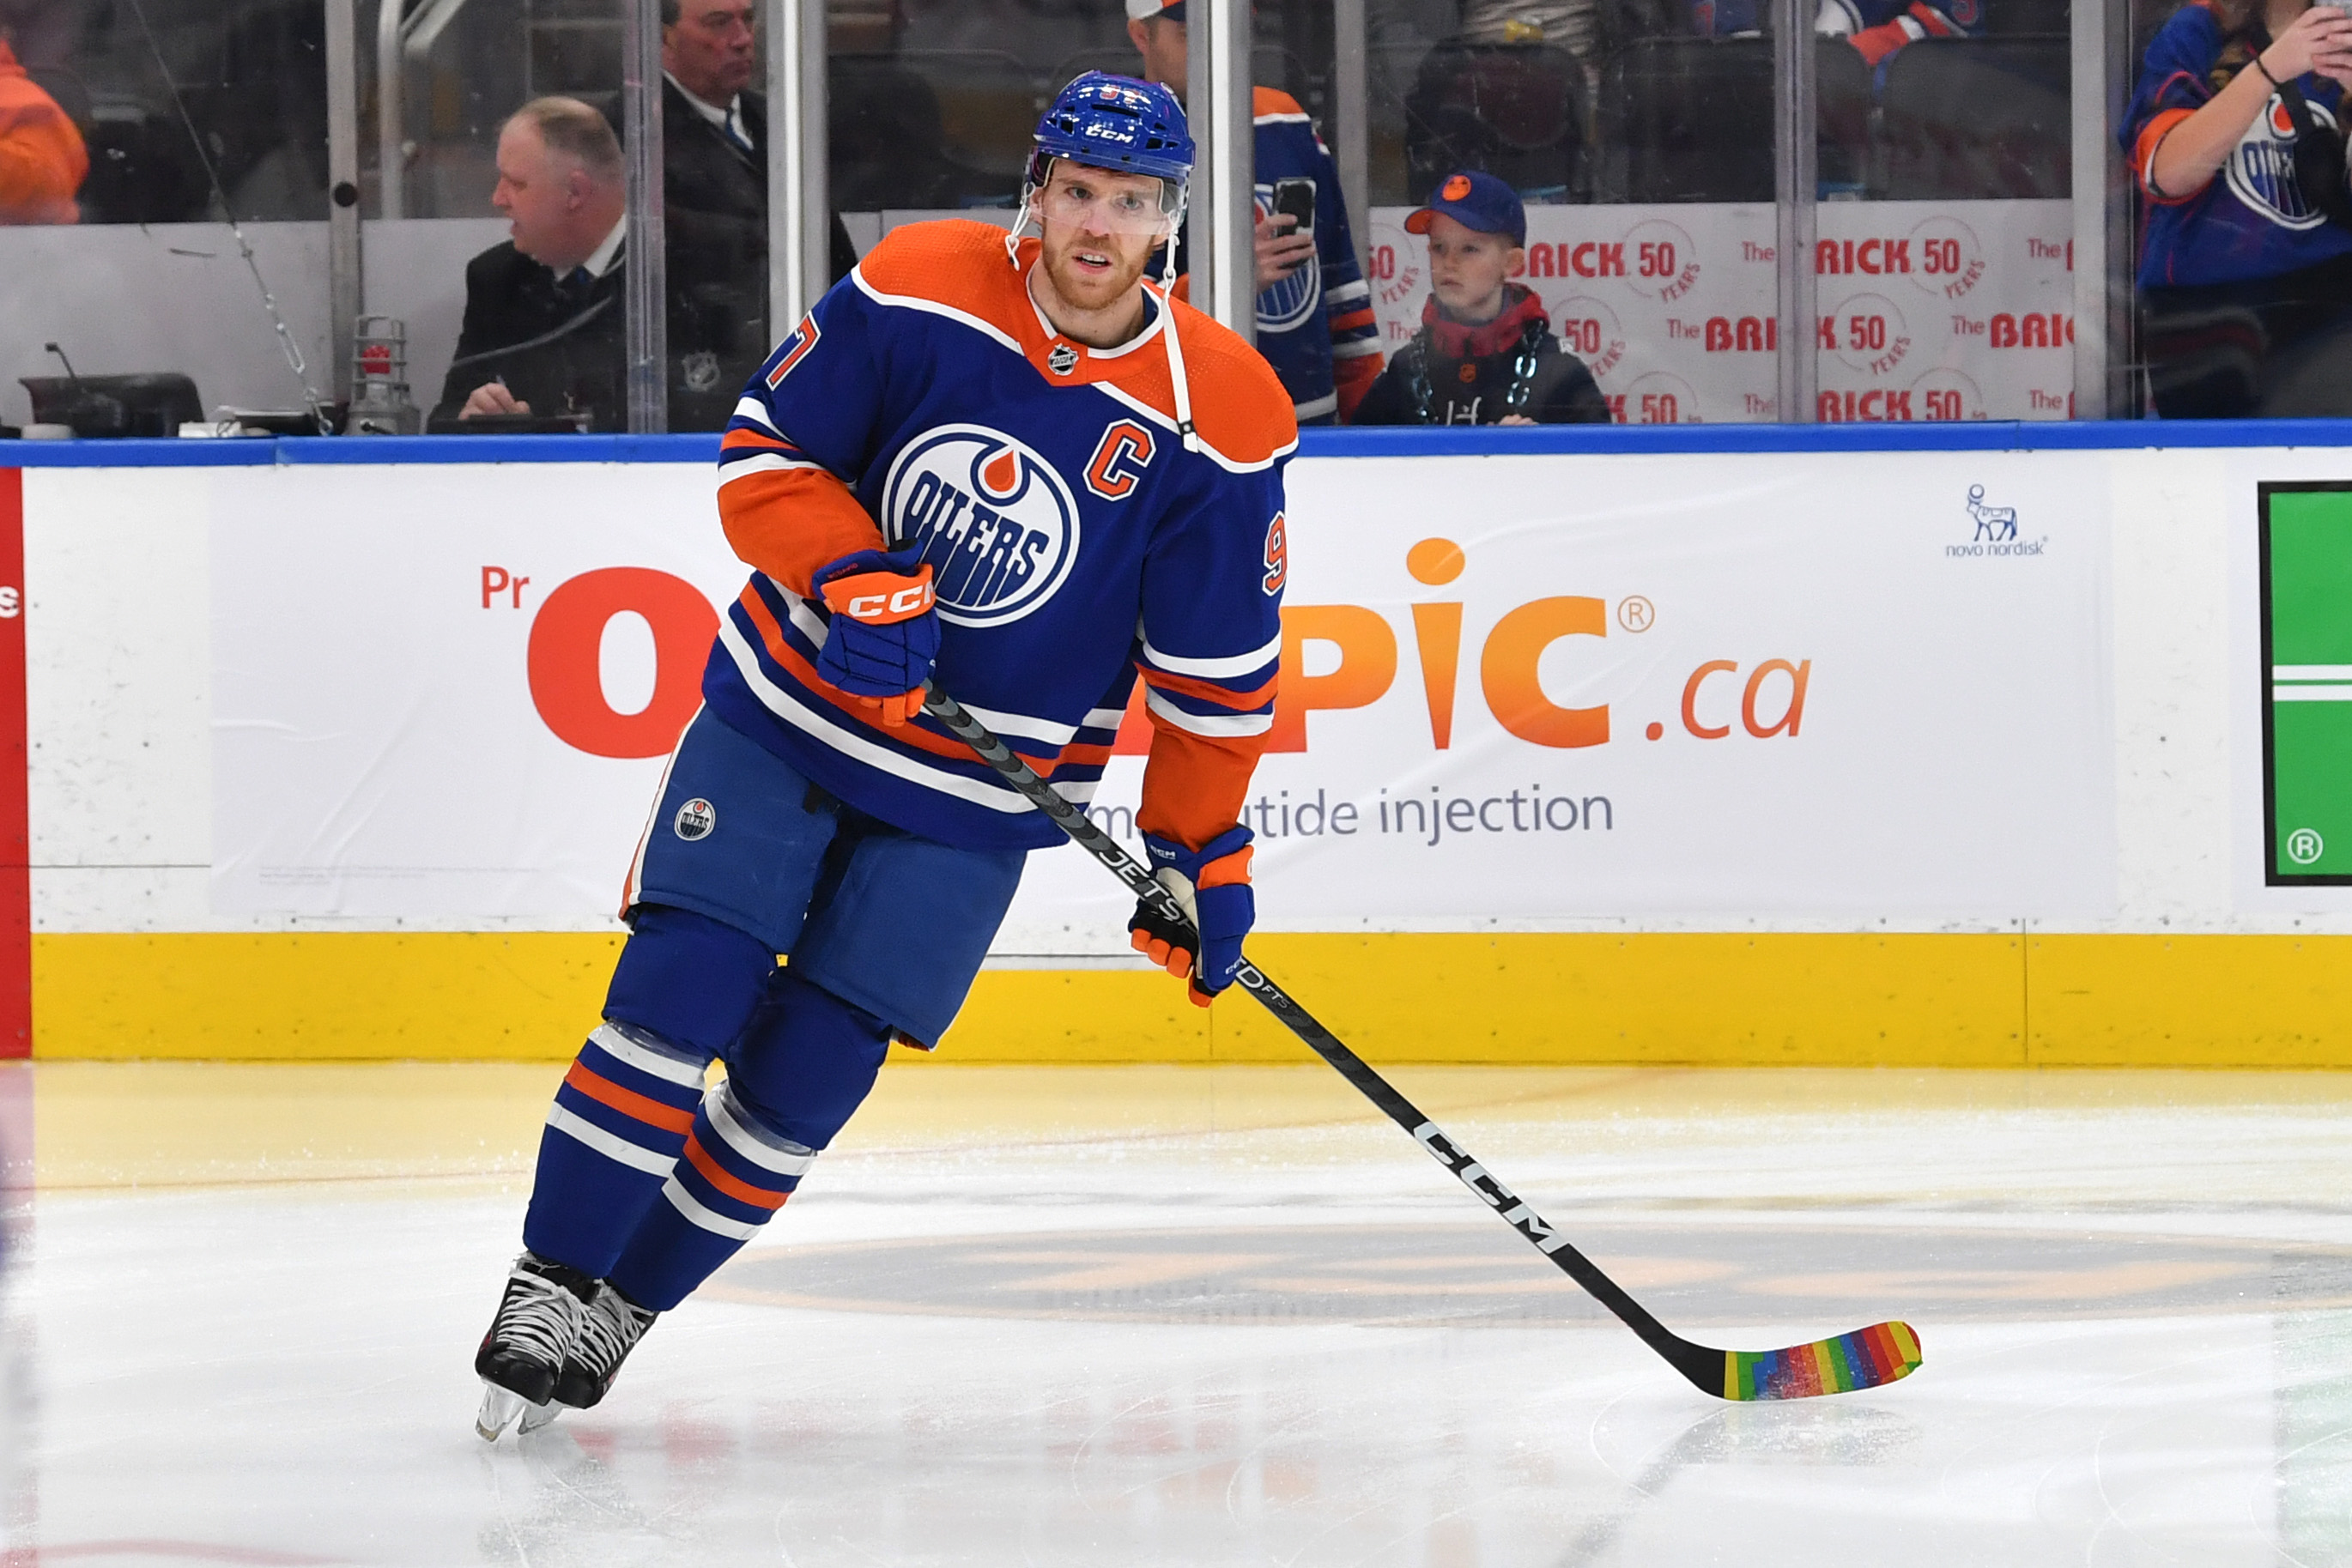 Connor McDavid of the Edmonton Oilers skates with Pride tape during warm ups before the game against the Vegas Golden Knights on March 25, 2023, at Rogers Place in Edmonton, Canada.